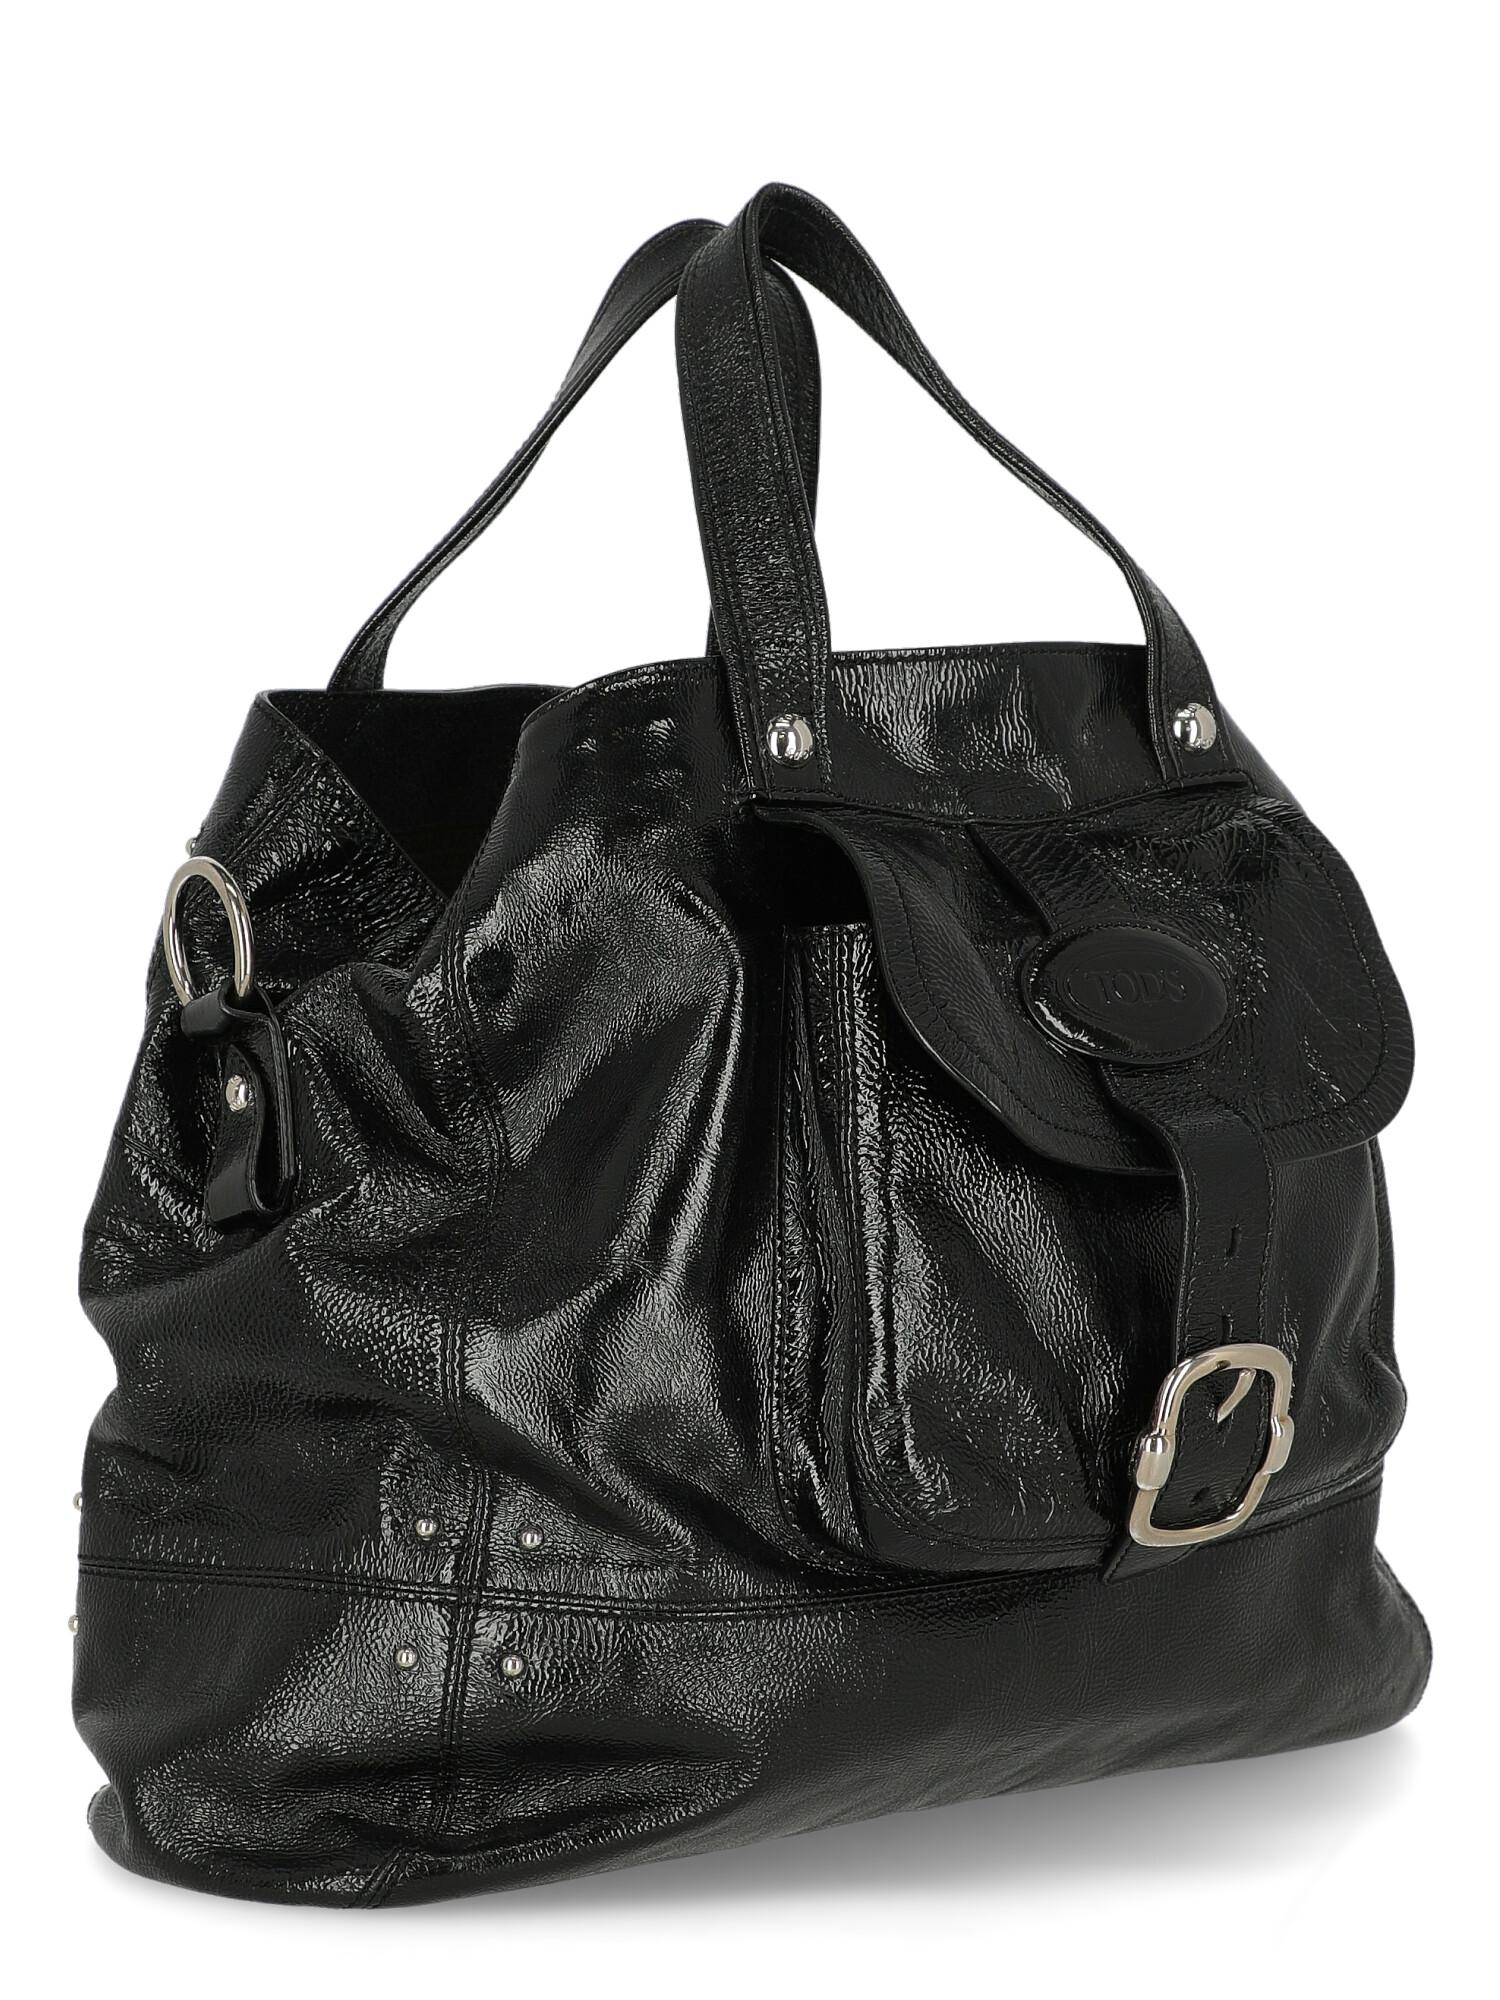 Tod'S  Women   Shoulder bags  Black Leather  In Good Condition For Sale In Milan, IT